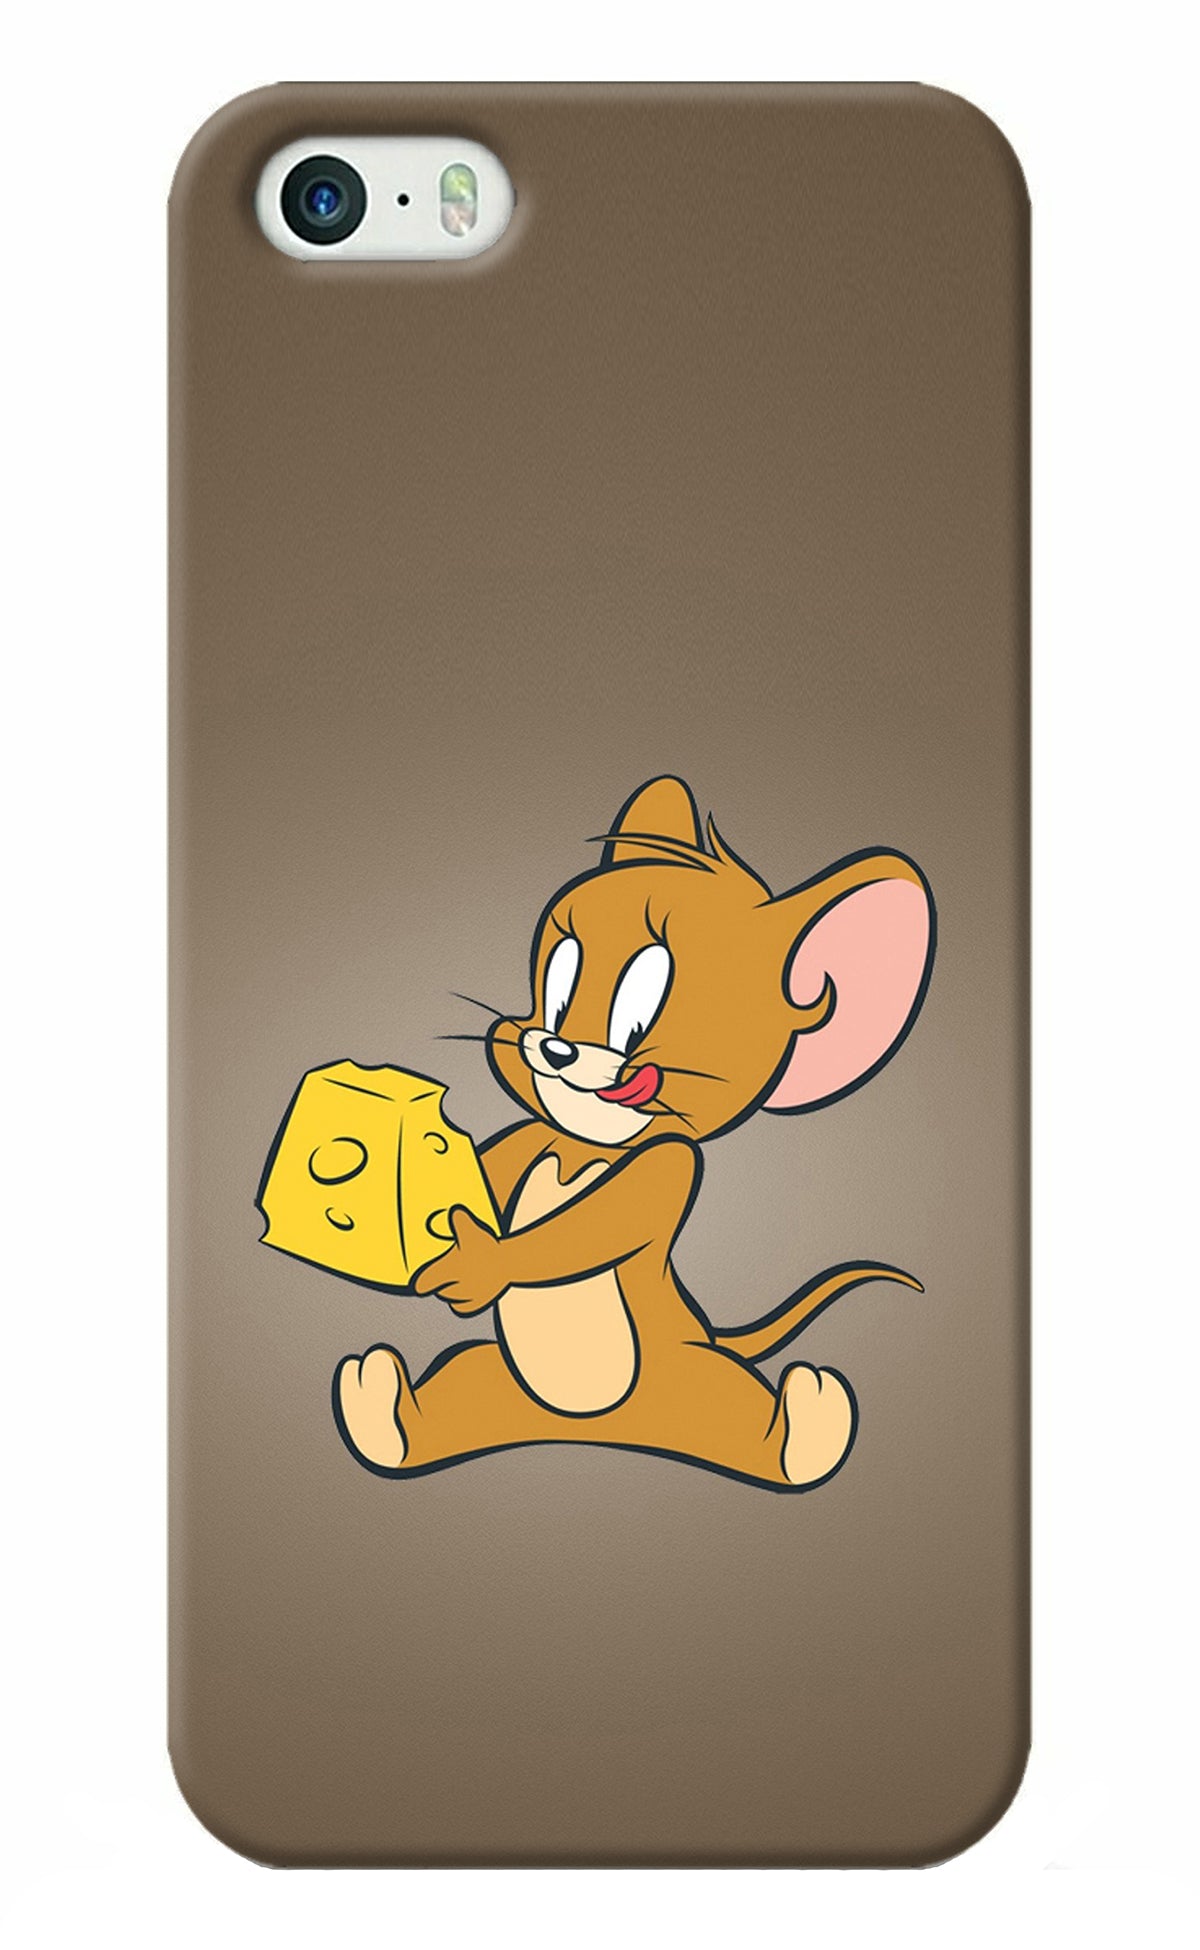 Jerry iPhone 5/5s Back Cover